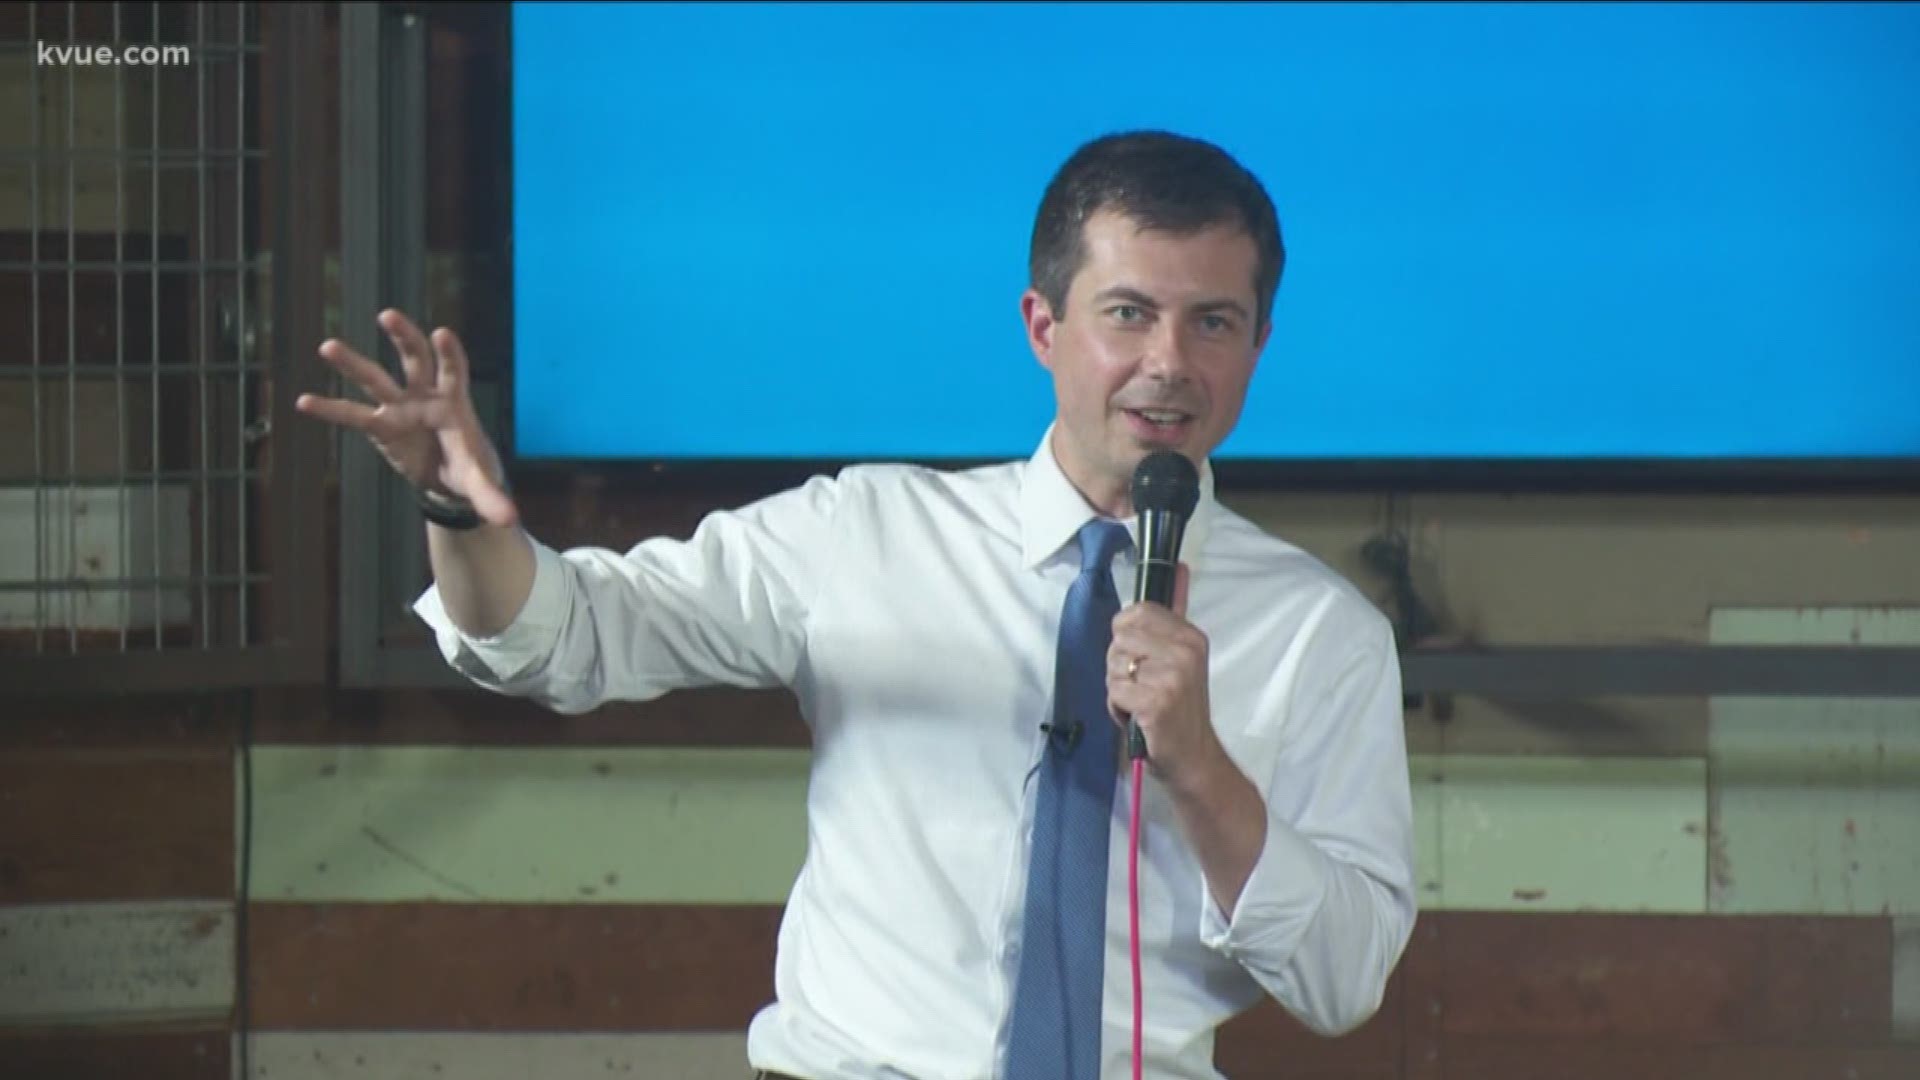 After speaking at a gun safety forum on Saturday morning, 2020 presidential candidate Pete Buttigieg met with voters in Austin.